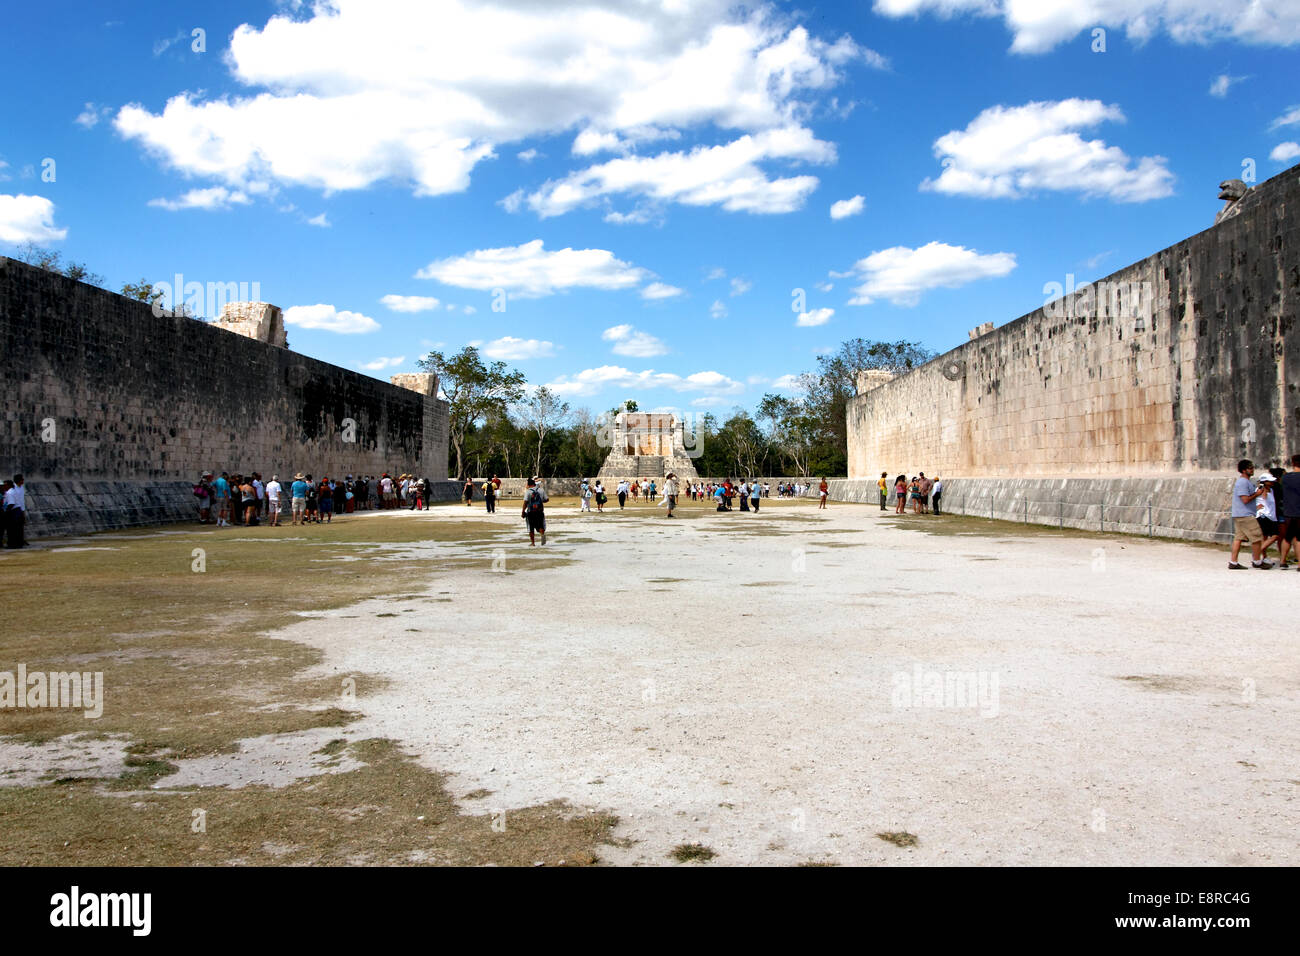 Tourists roam the ancient Mayan ball game Court of the Juego de Pelota ruins at Chicen Itza, Yucatan, Mexico in March 2012. Stock Photo